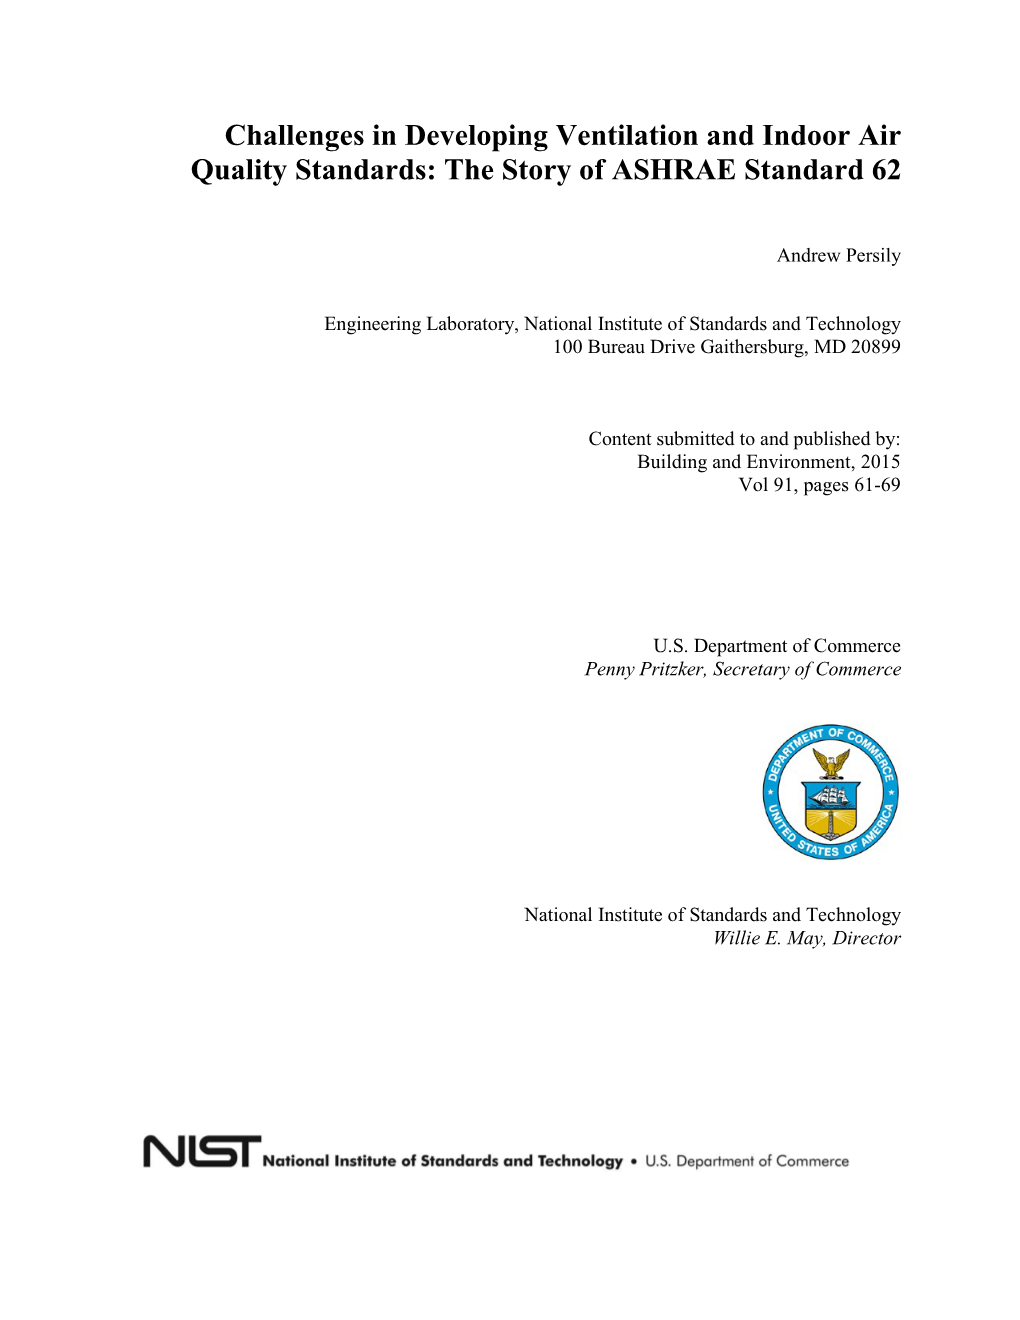 Challenges in Developing Ventilation and Indoor Air Quality Standards: the Story of ASHRAE Standard 62